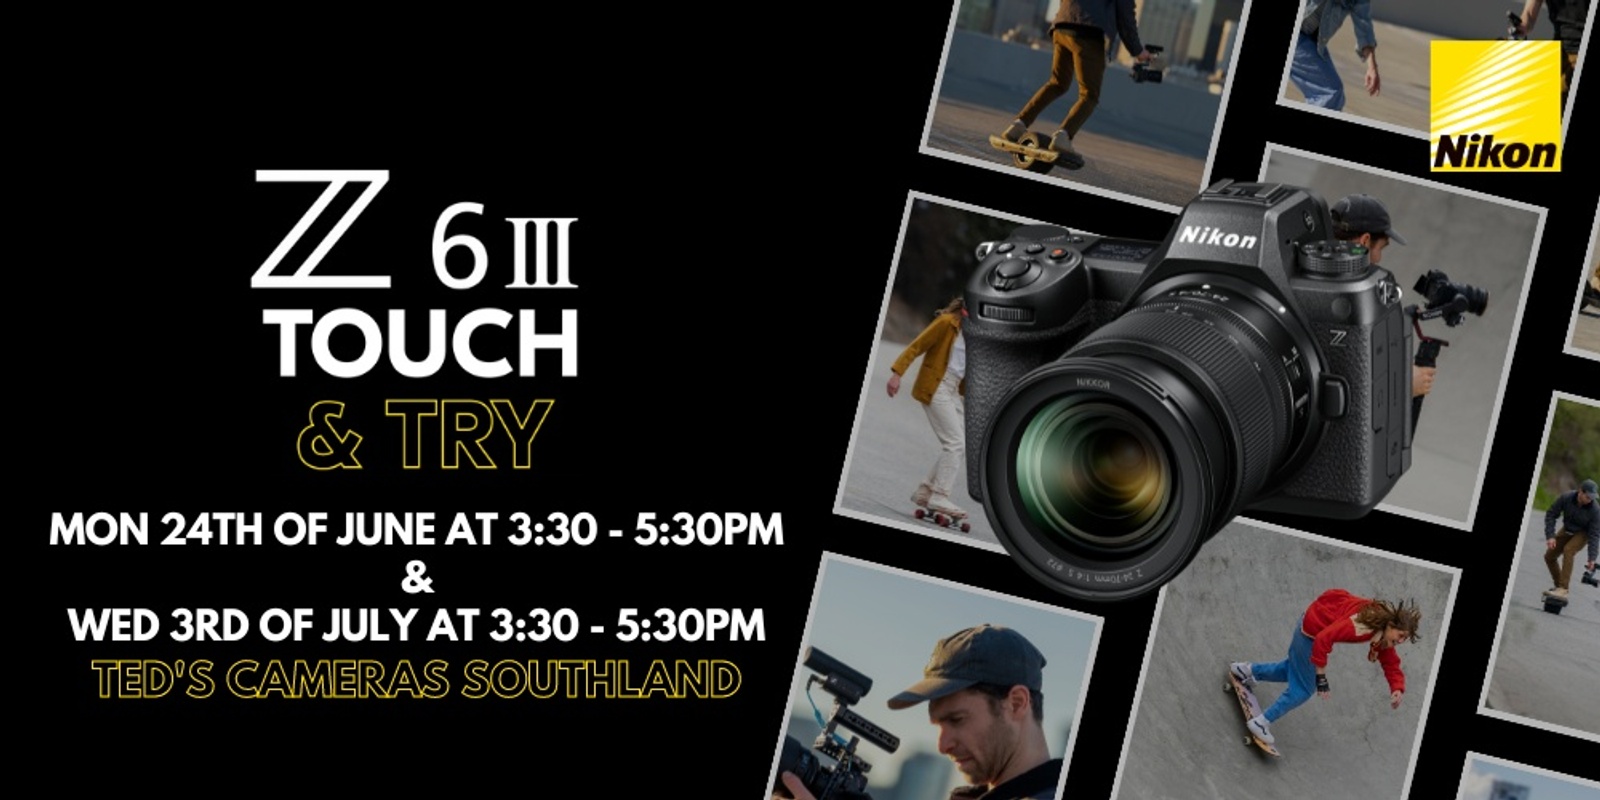 Banner image for Nikon Z6III Touch & Try Ted's Cameras Southland